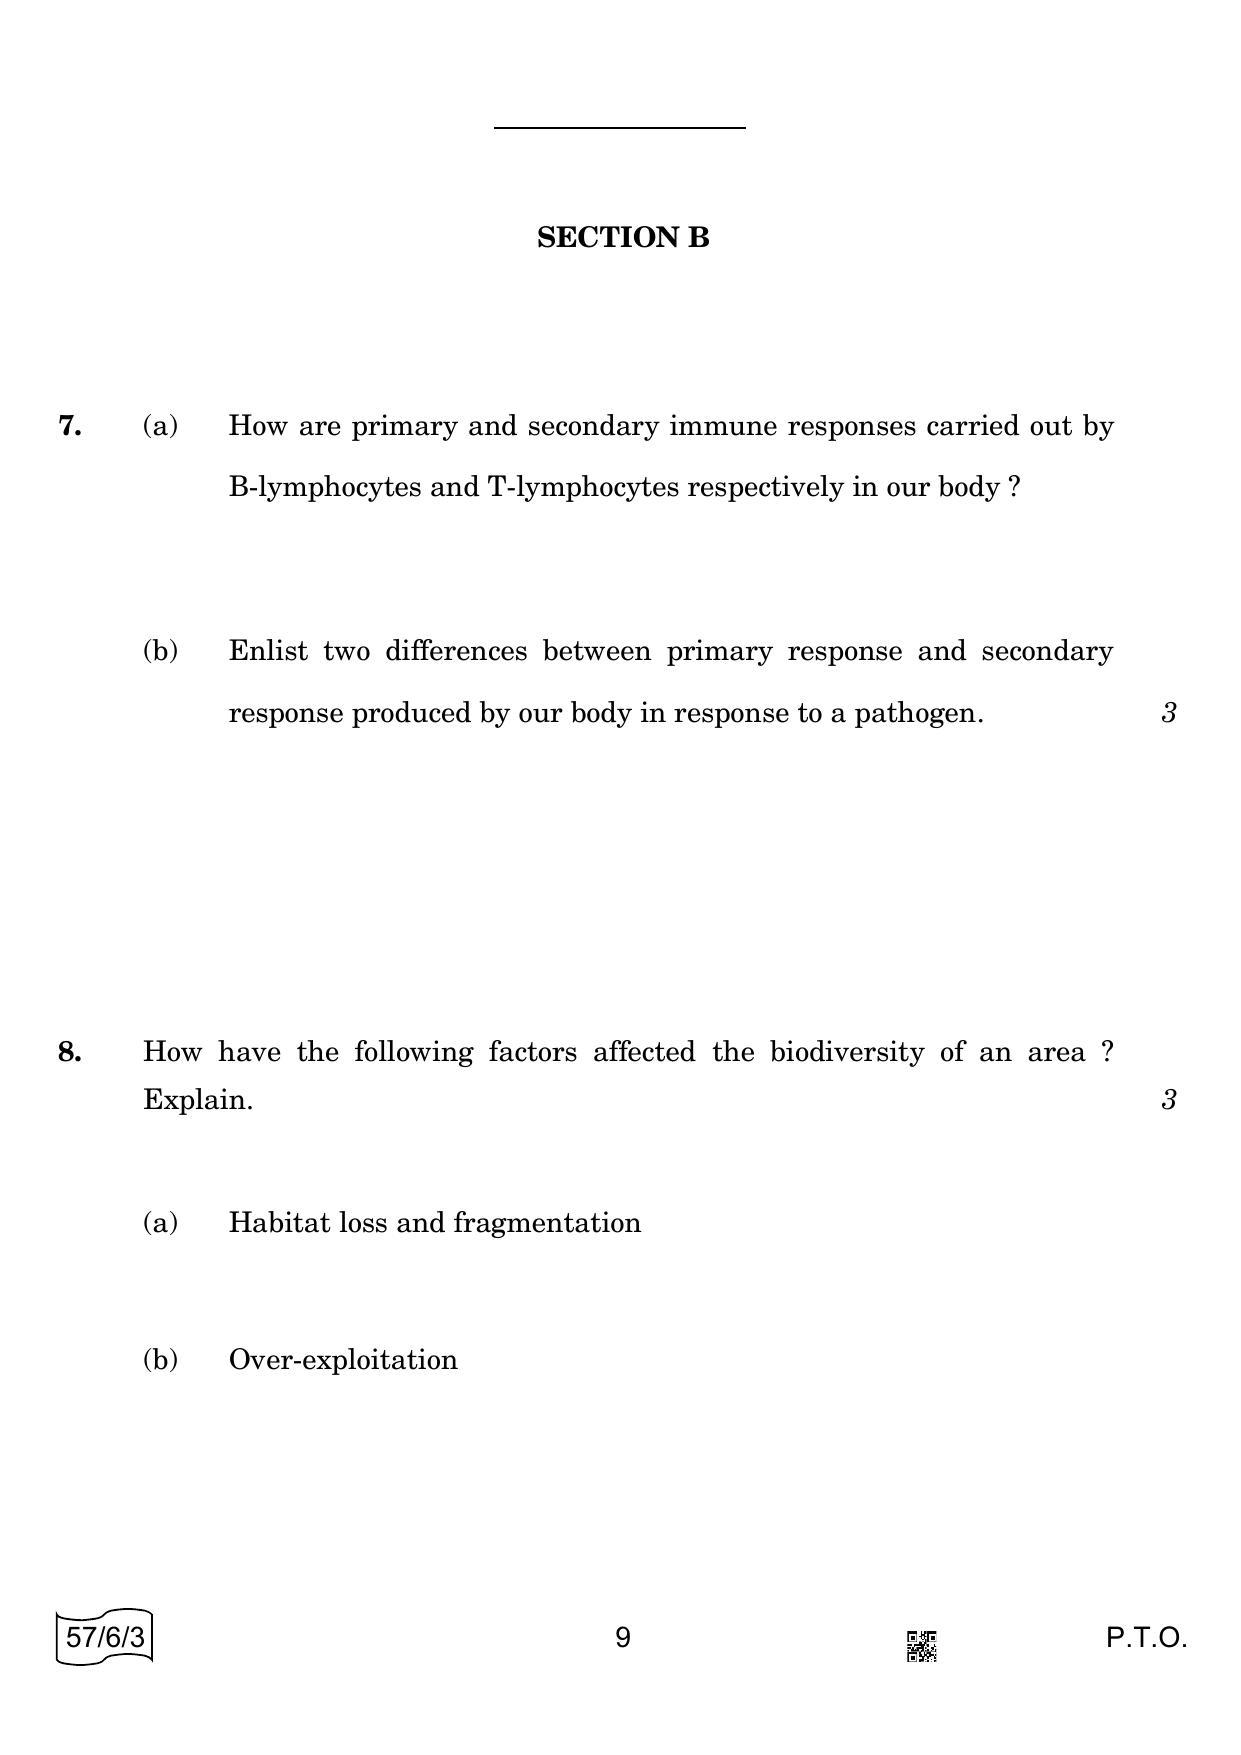 CBSE Class 12 57-6-3 BIOLOGY 2022 Compartment Question Paper - Page 9